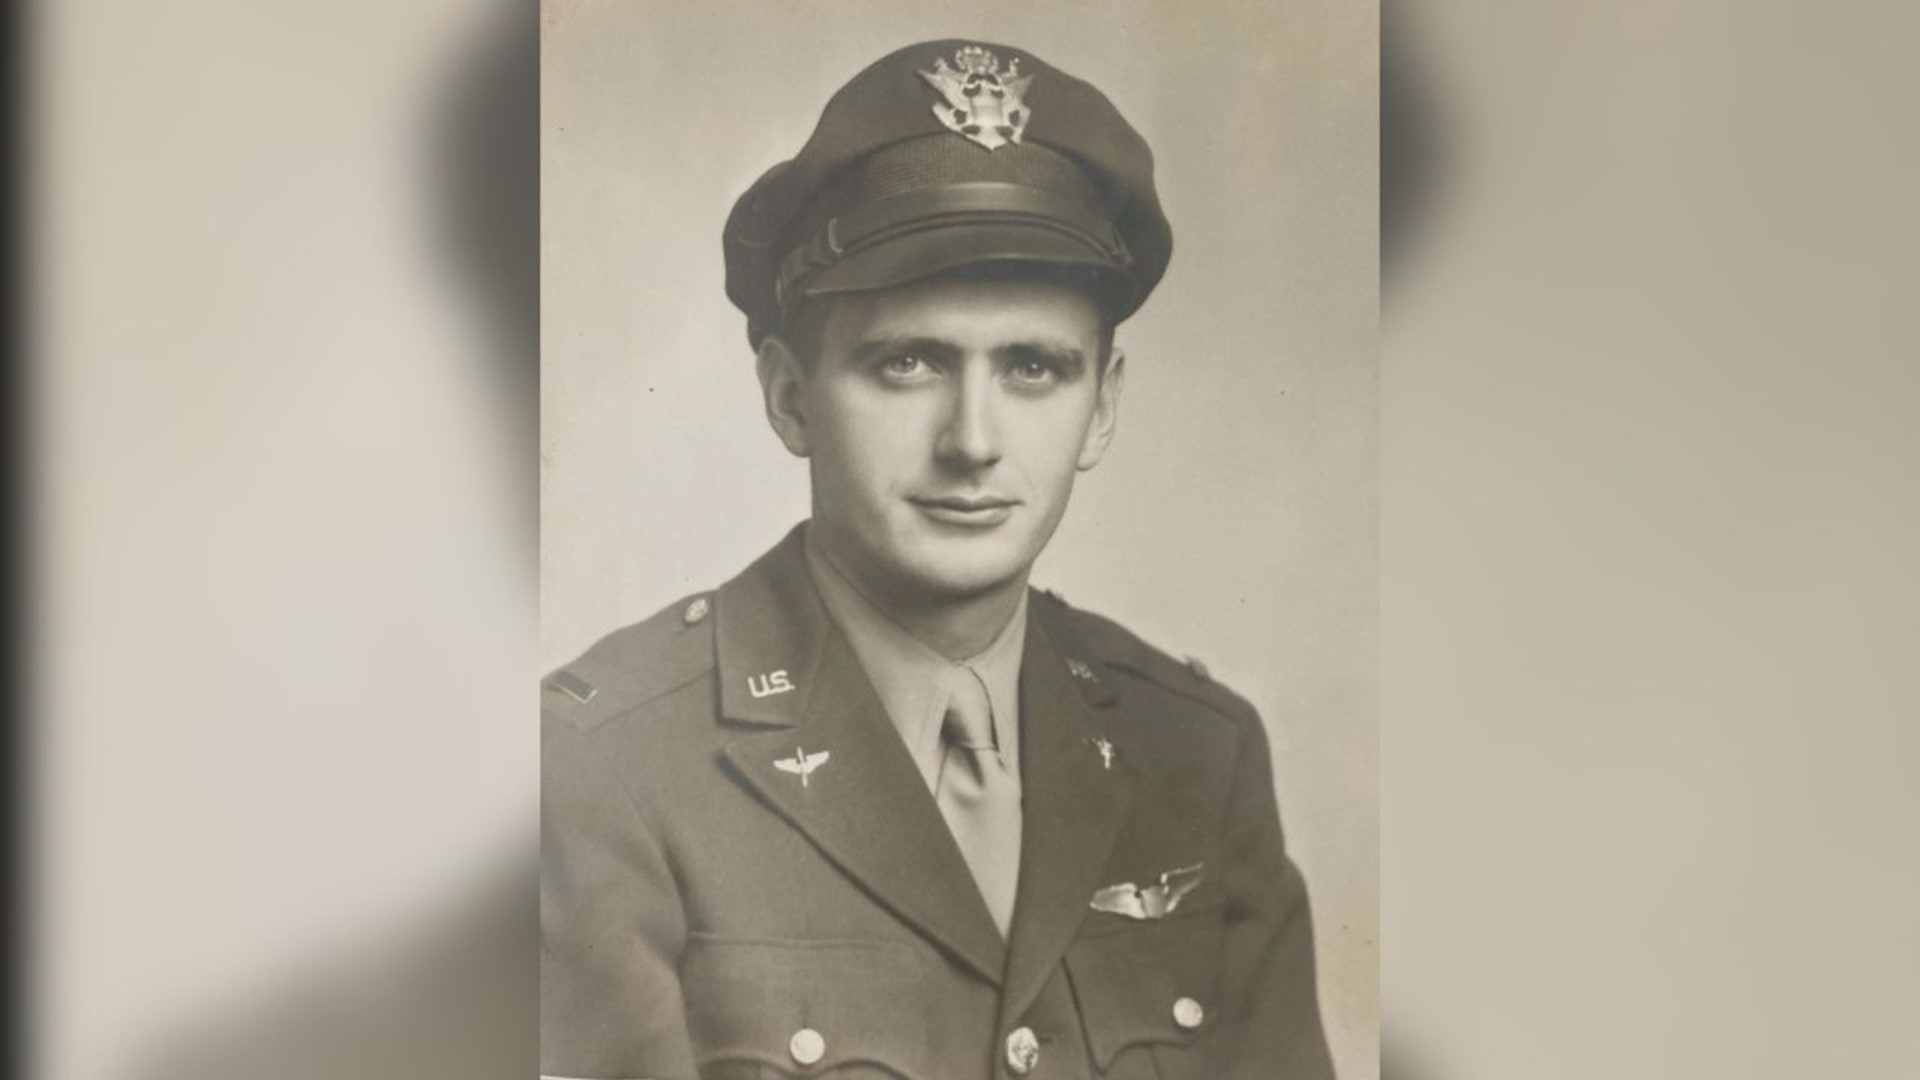 U.S. Army Air Forces 2nd Lt. James Litherland, who was killed in action in 1944 set to return home to Williamsport